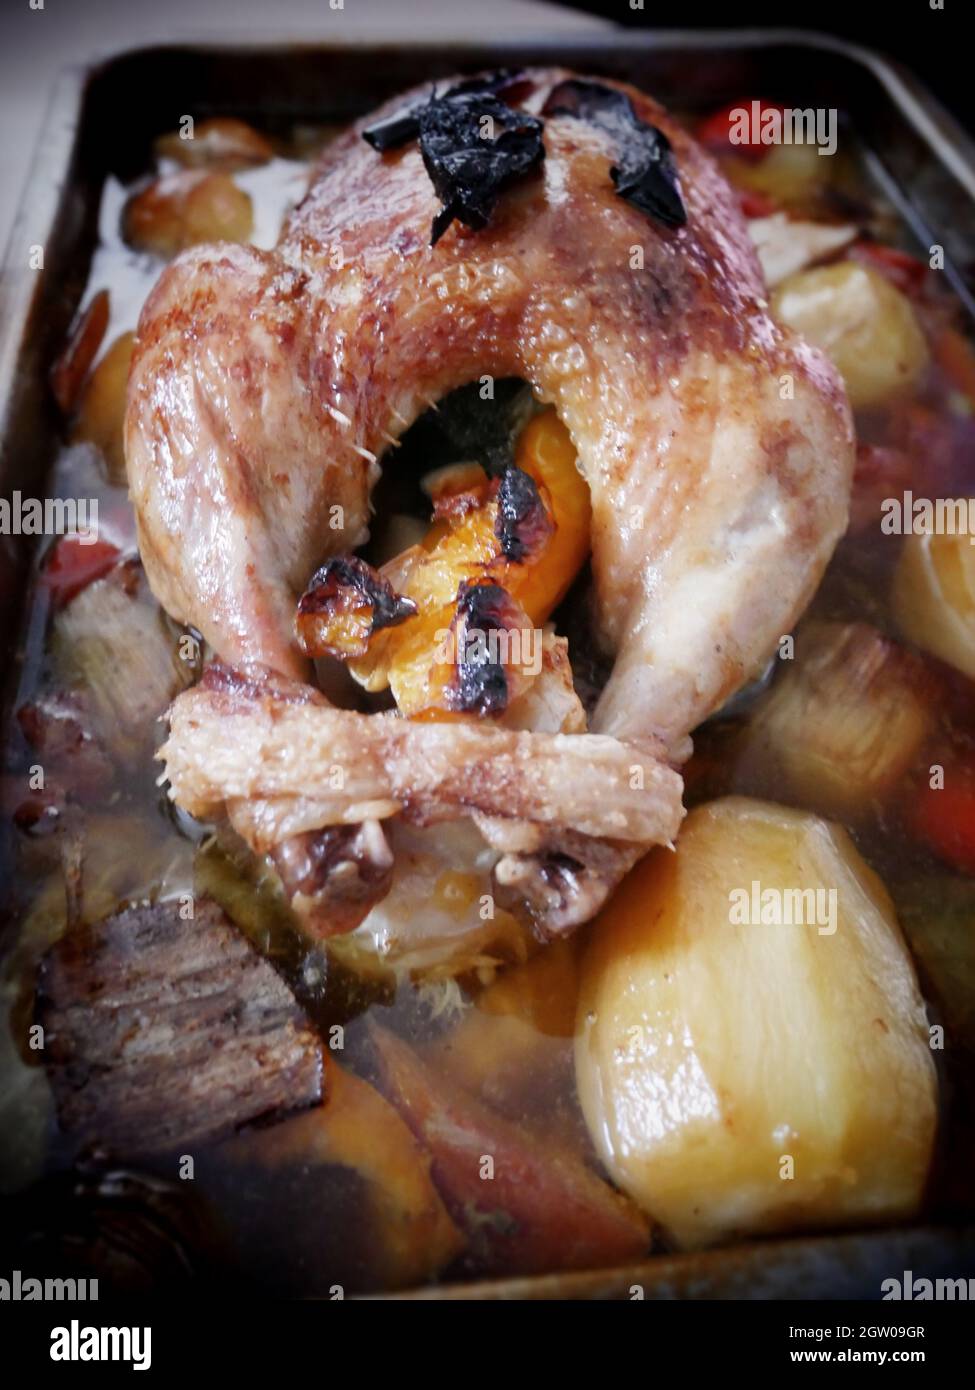 High Angle View Of Roasted Meat And Vegetables Served In Tray Stock Photo